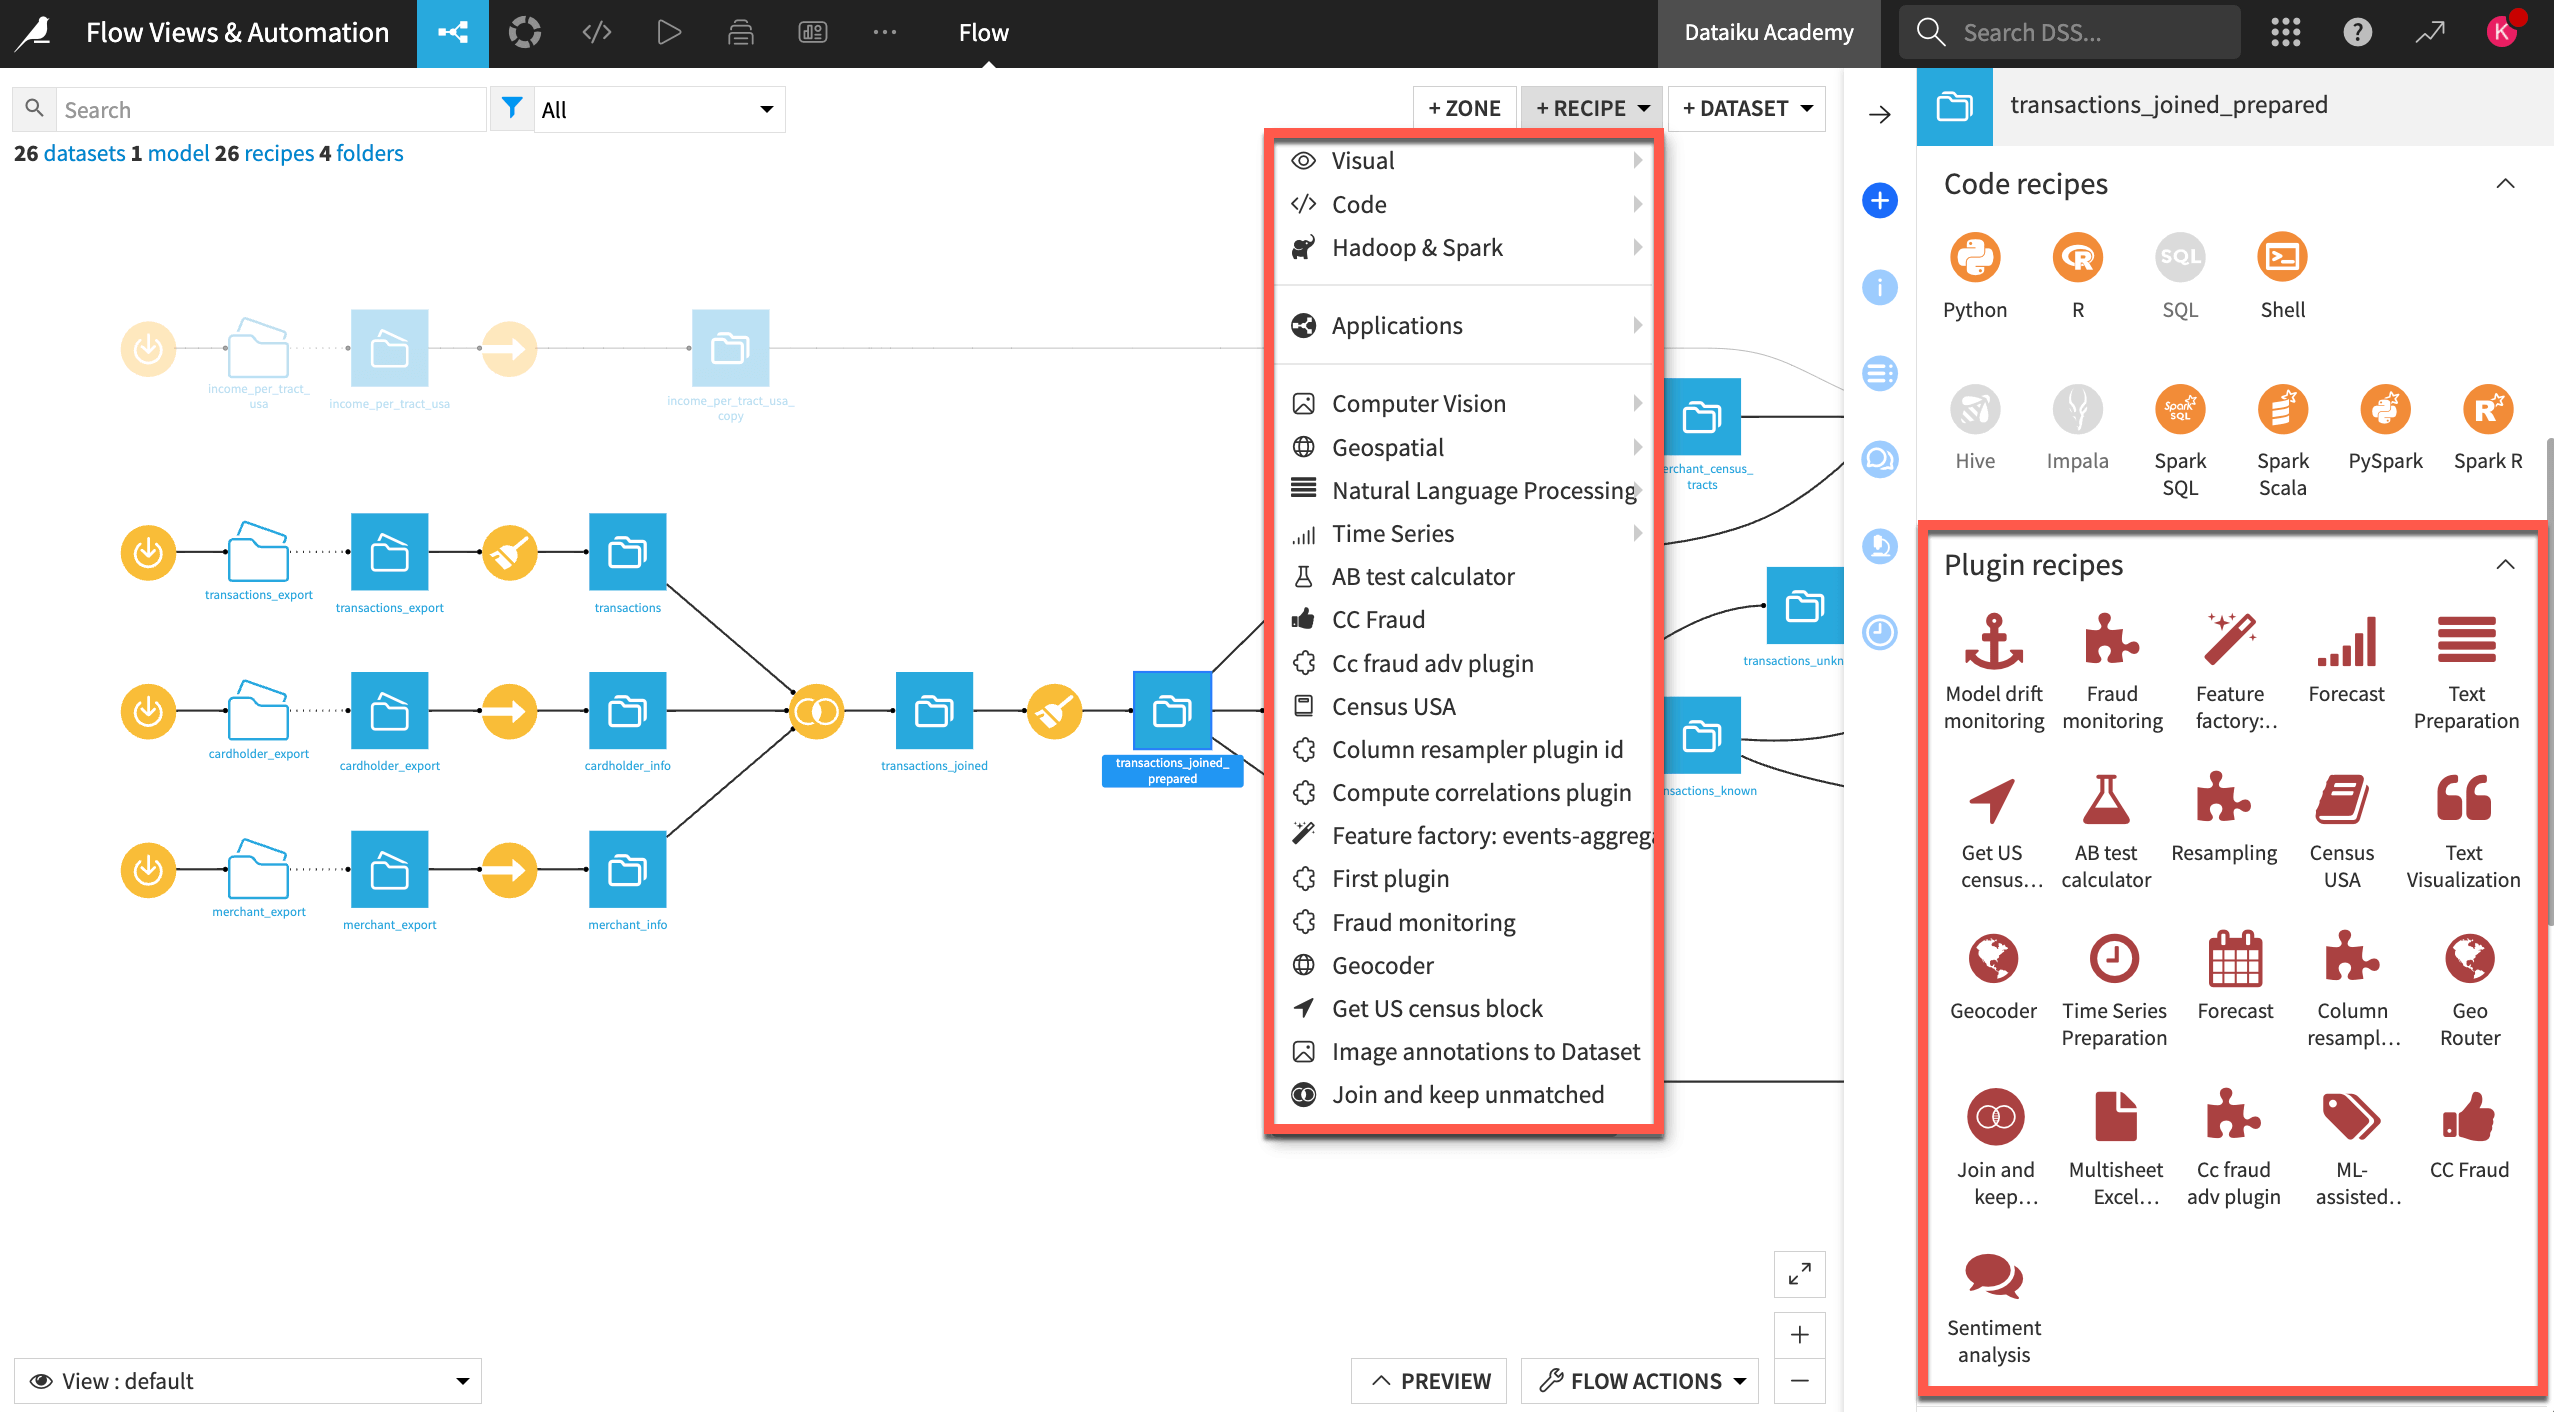 A Dataiku Flow showing how plugin recipes can be found either in the right panel or from the +Recipe dropdown.